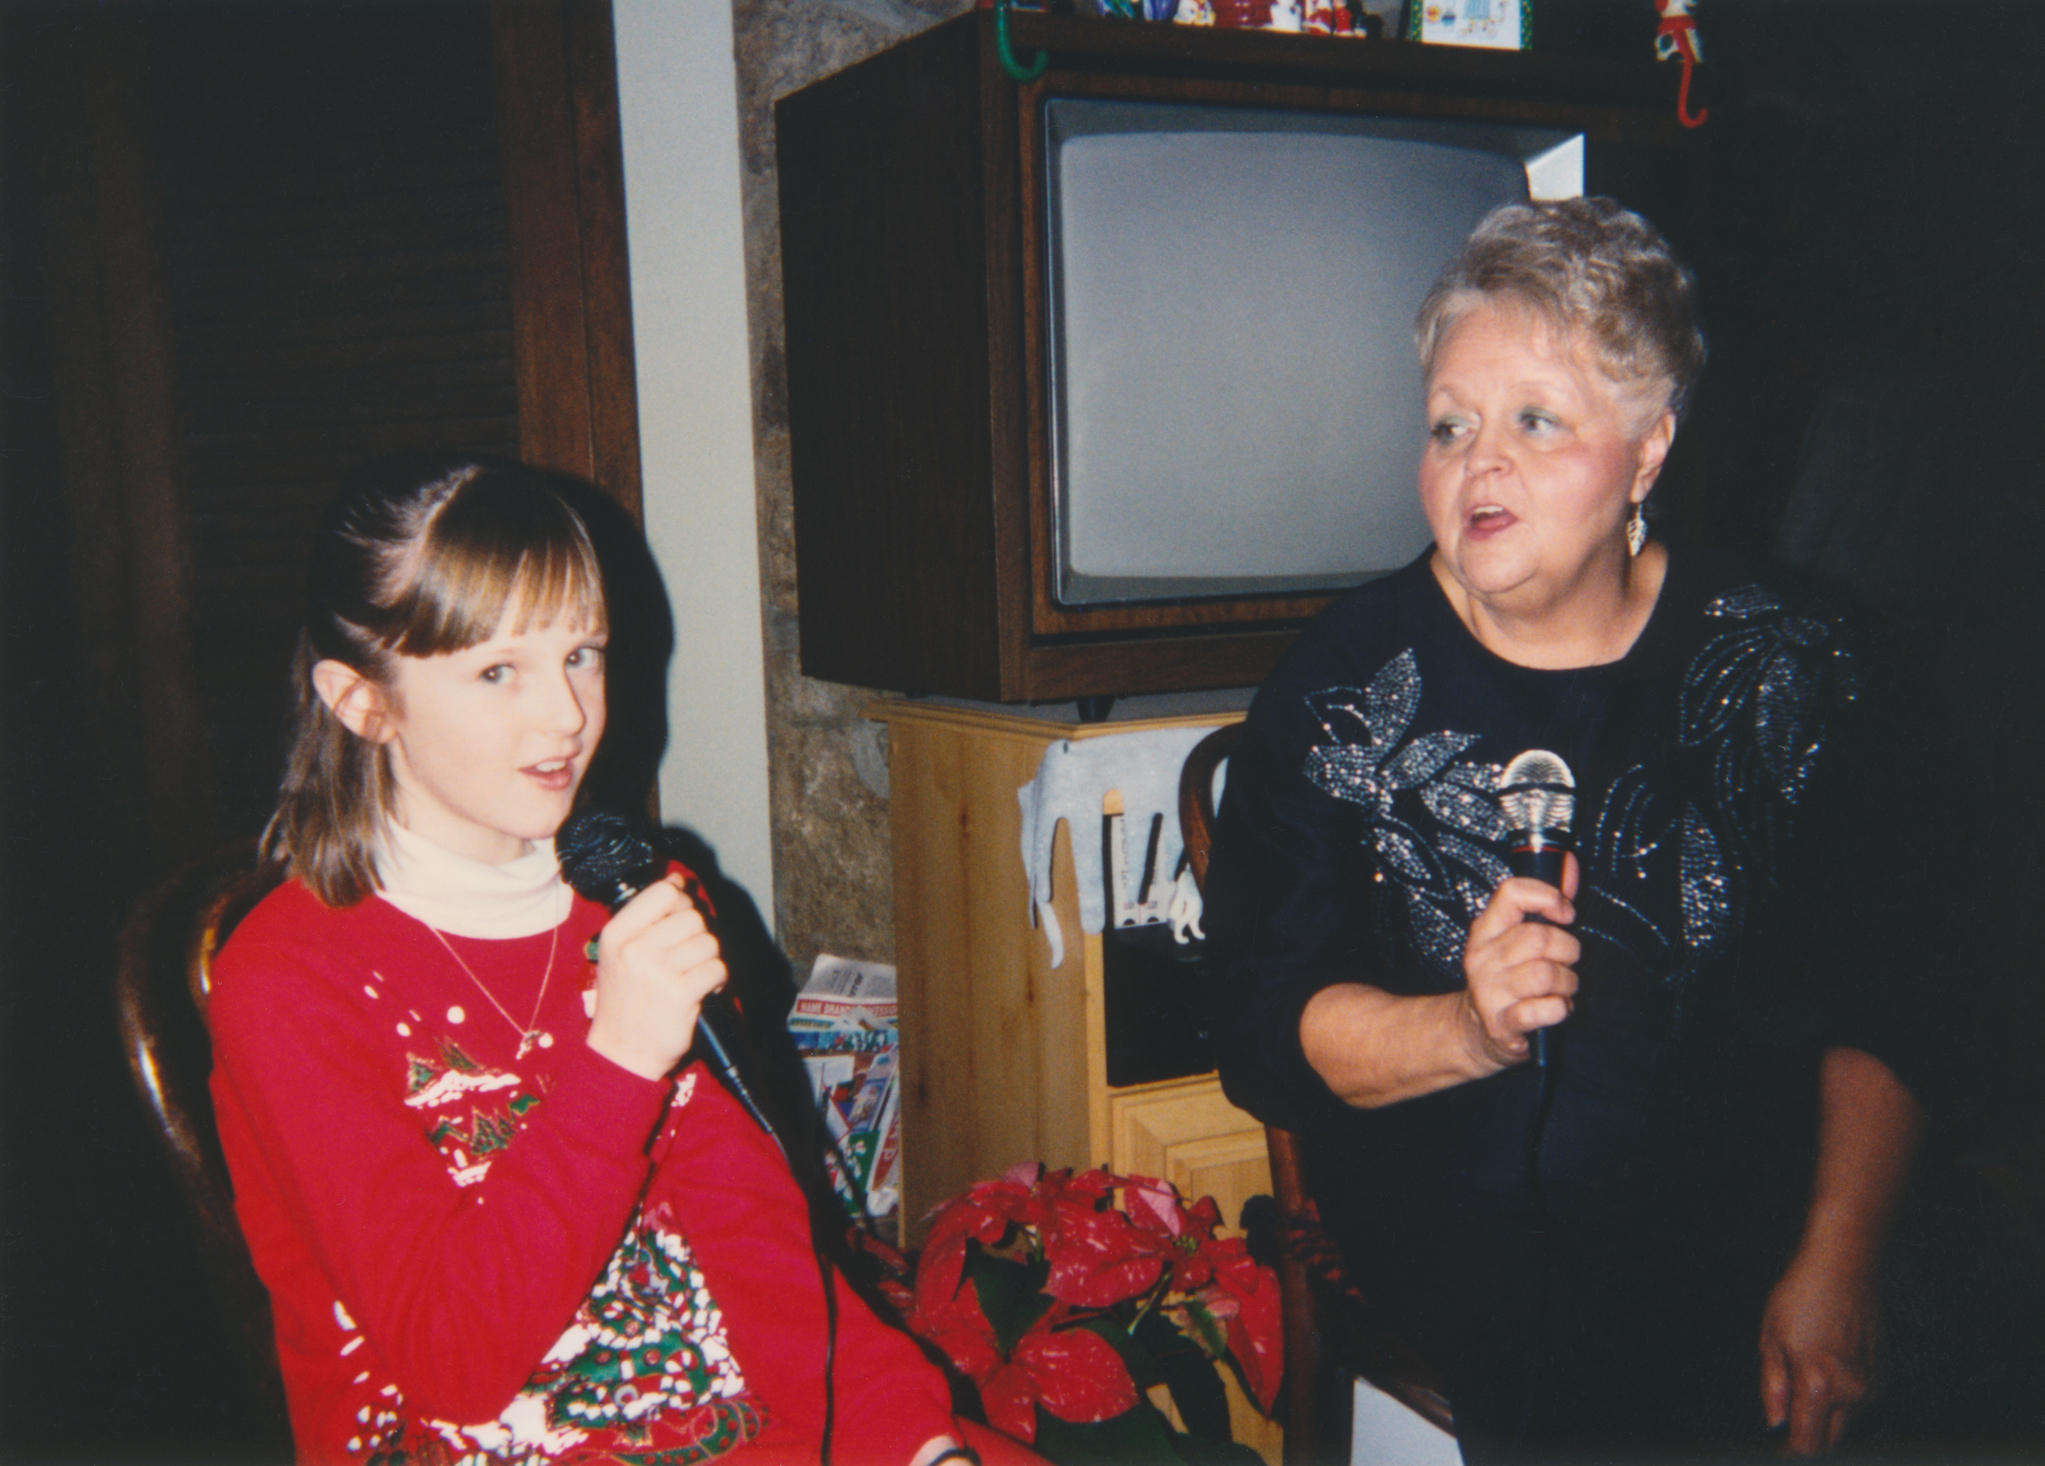 Girl and older woman singing into microphones, casual home setting with an old-fashioned cathode ray TV in the background